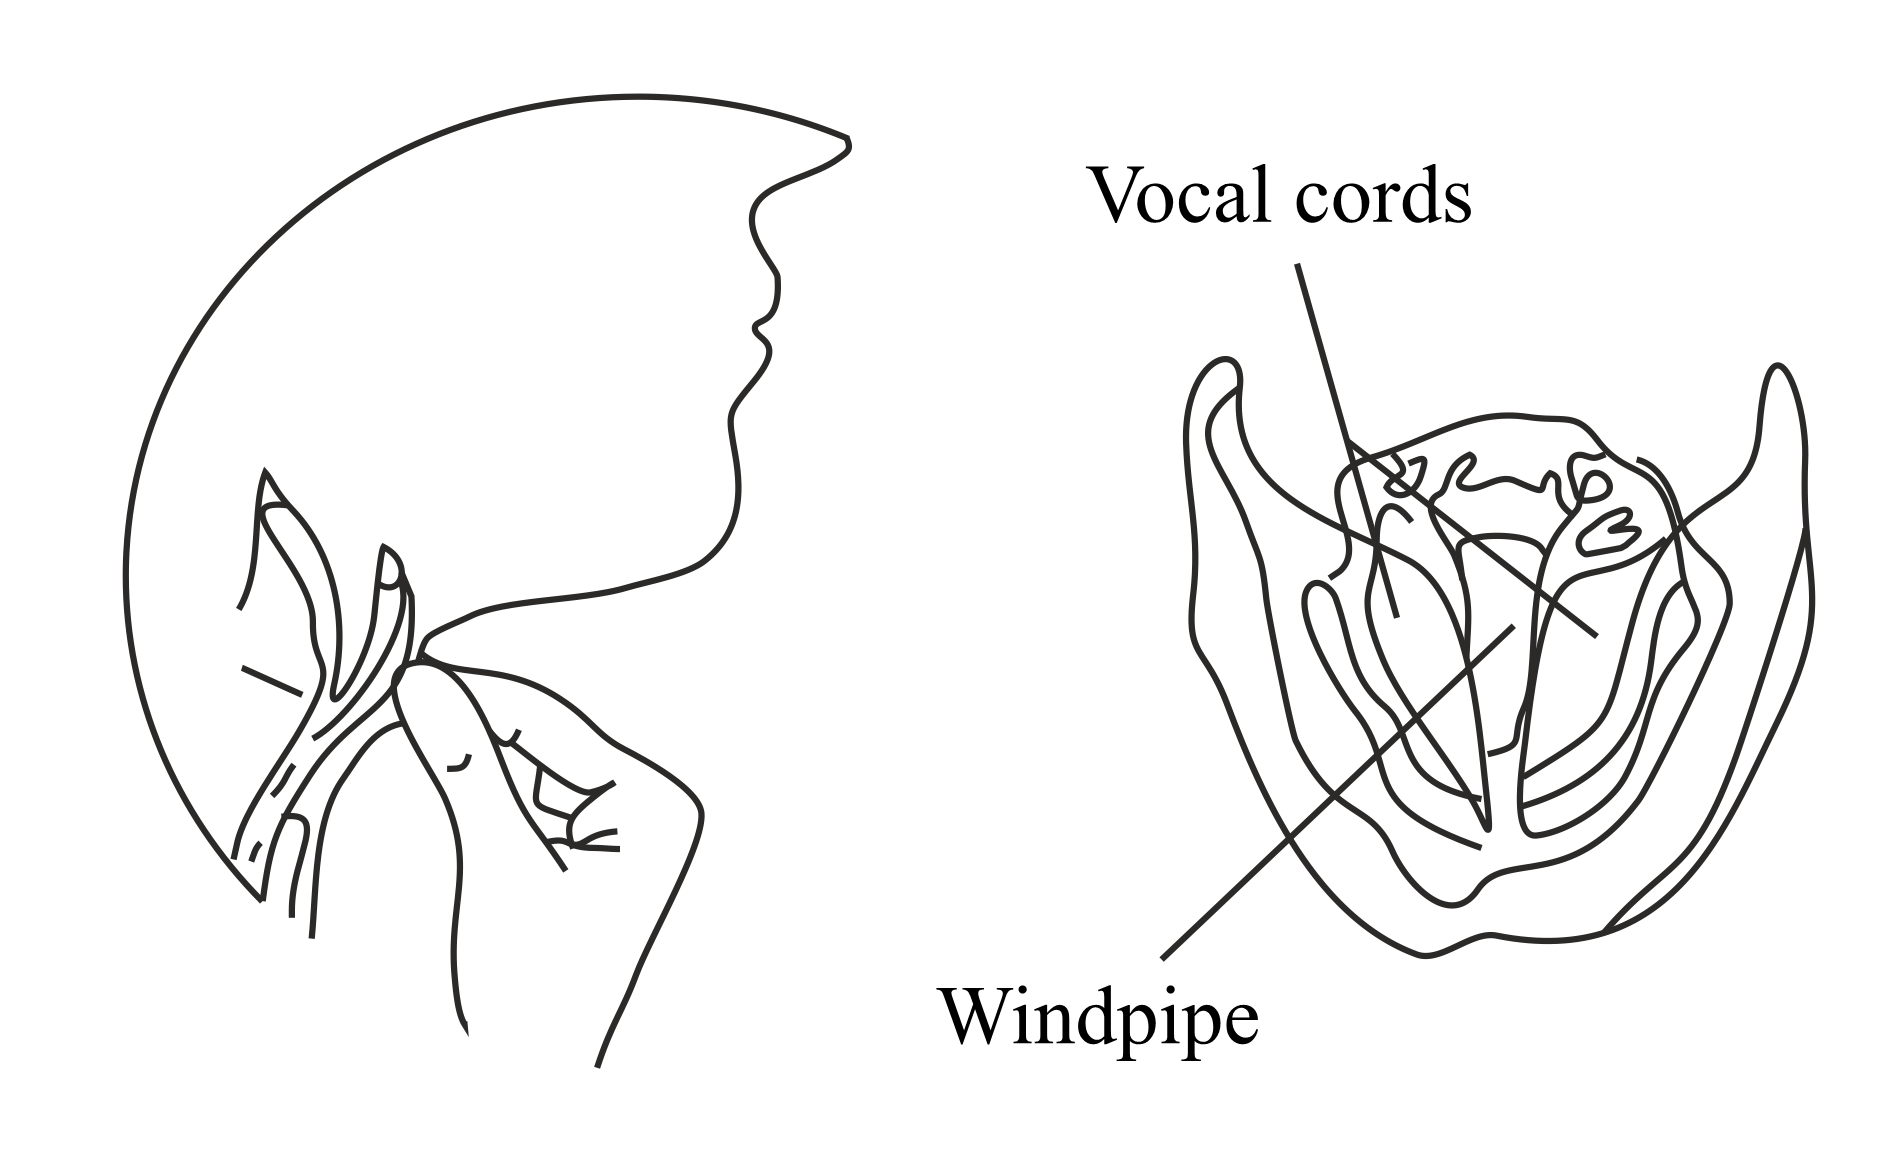 Sketch larynx and explain its function in your own words.